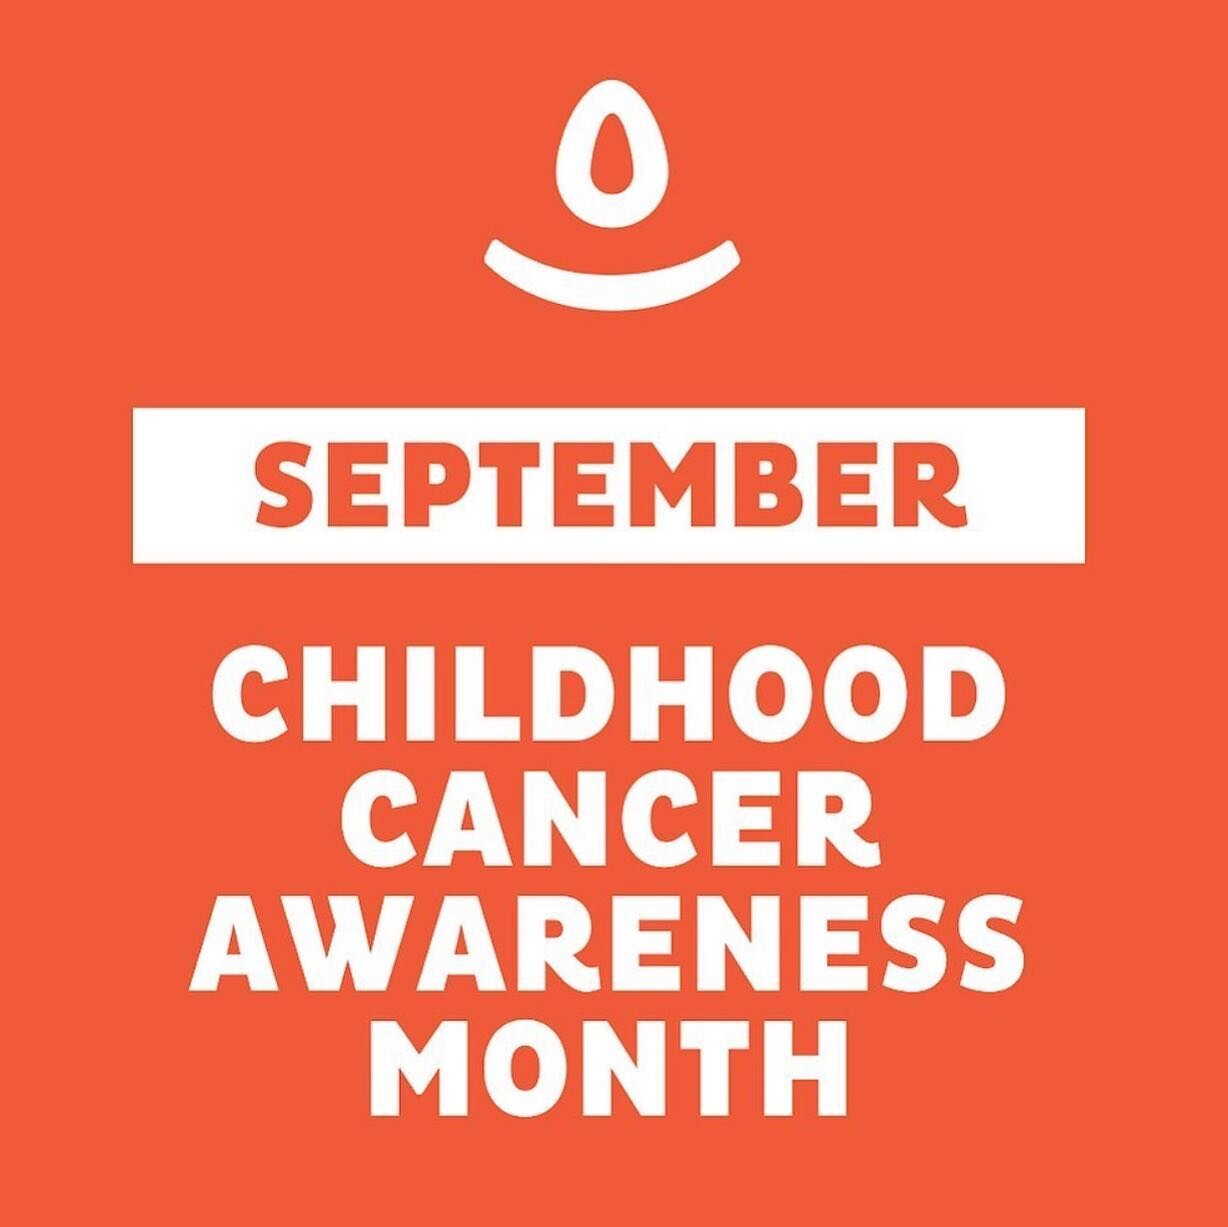 We recently worked with the @koalakids foundation in support of Childhood Cancer Awareness Month in September. Colouring in, and other mindful activities, offers kids, adolescents, young adults, and families struggling with the stresses of cancer, a 